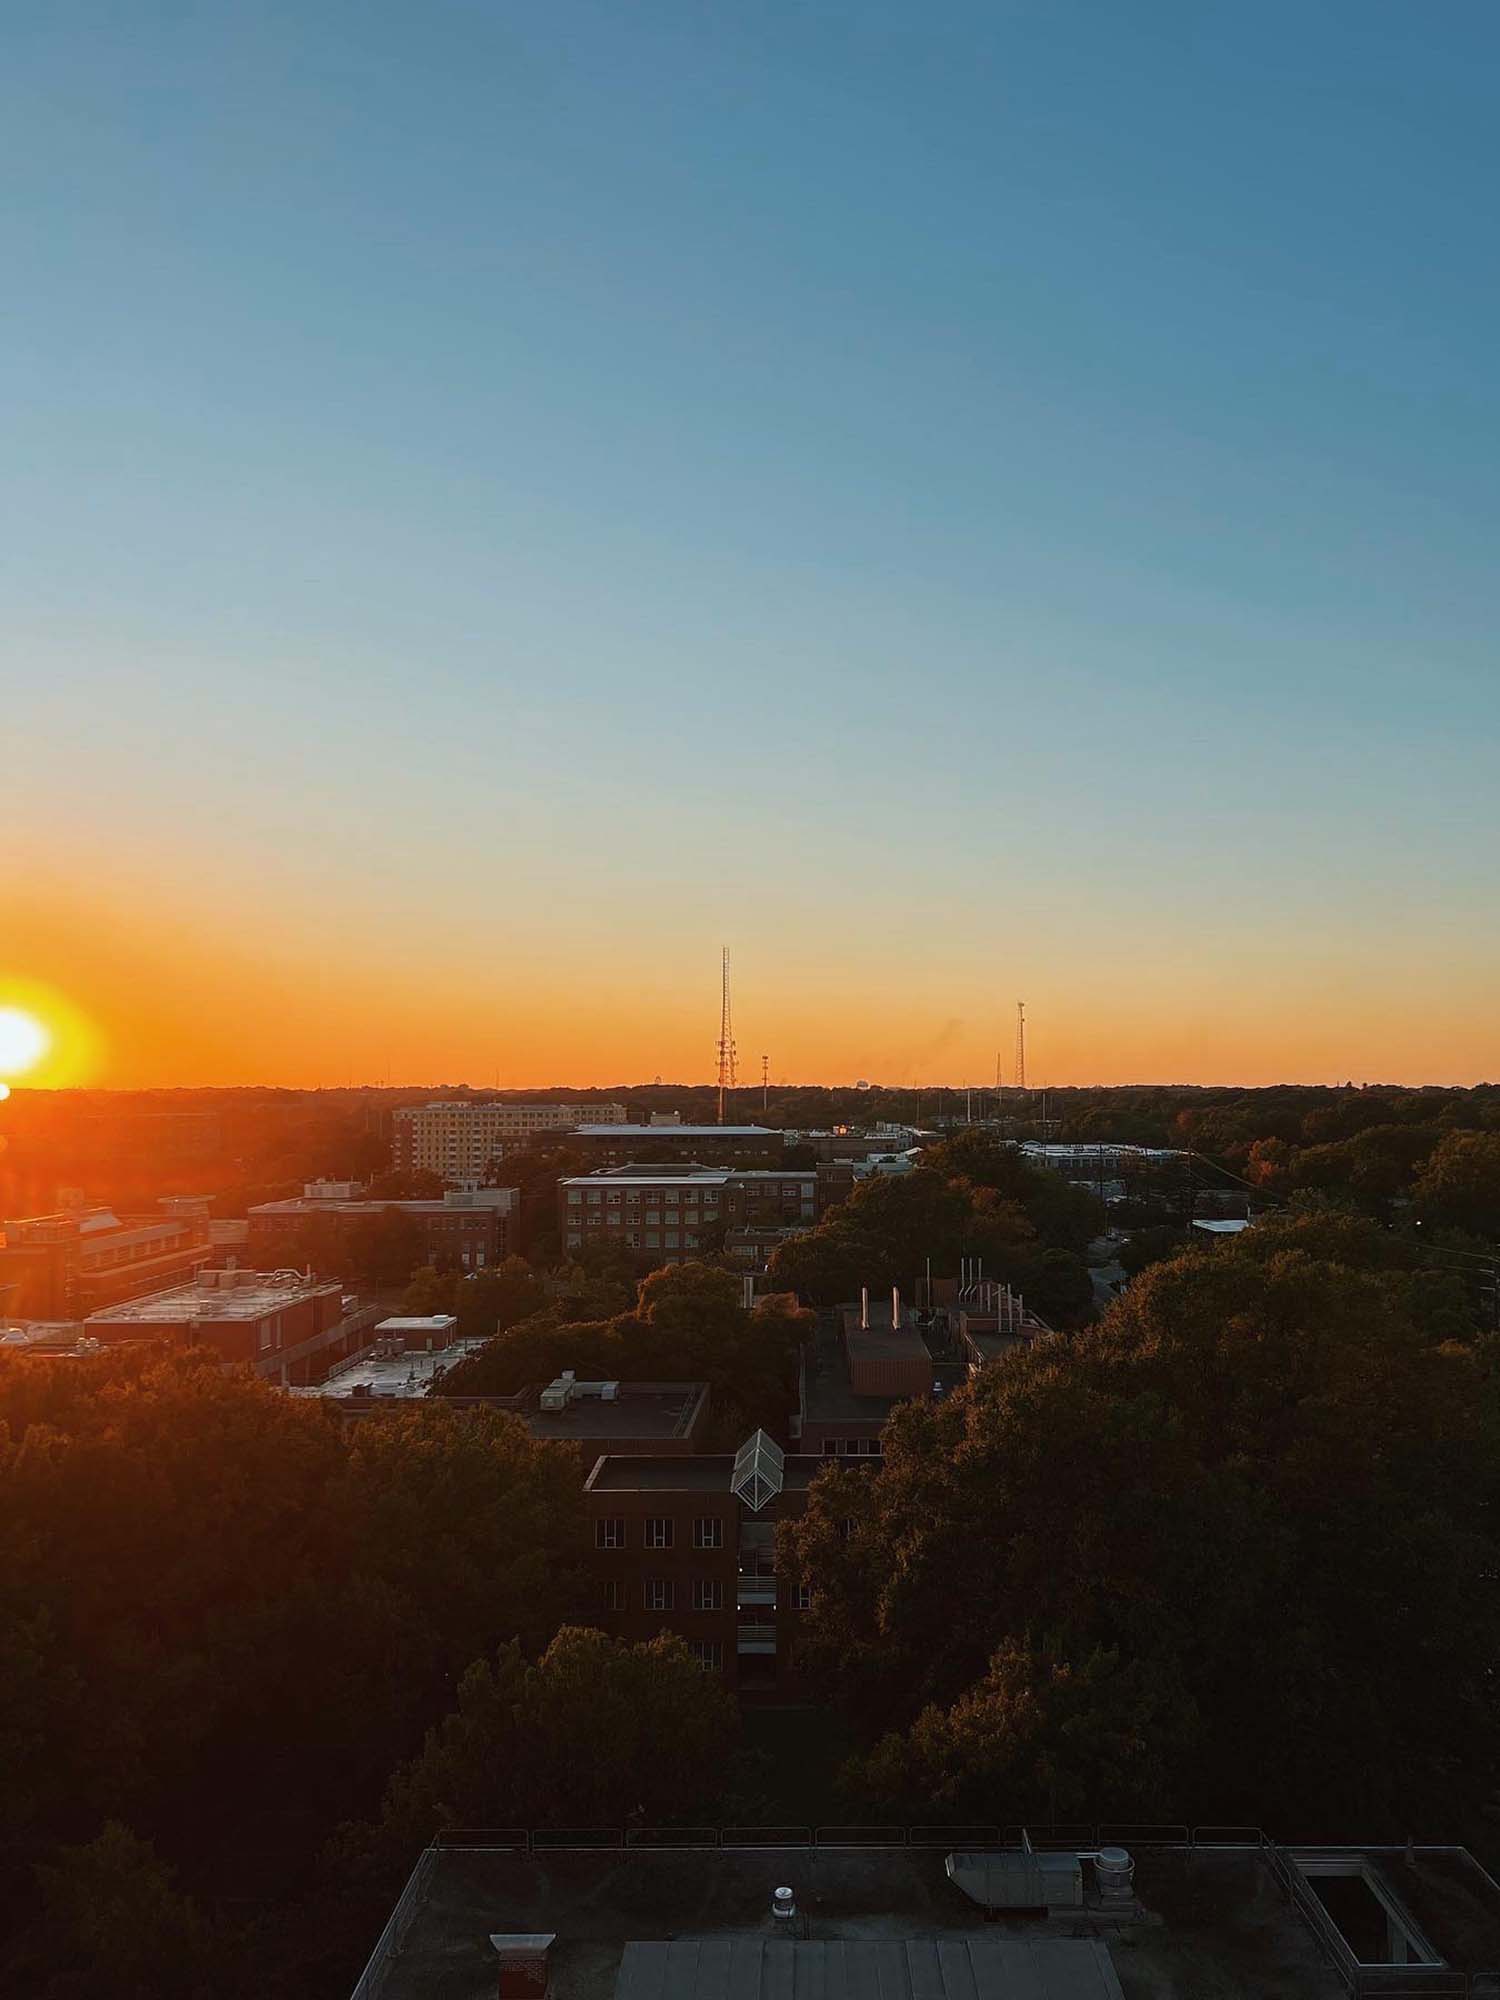 The fiery setting sun descends over NC State's campus.